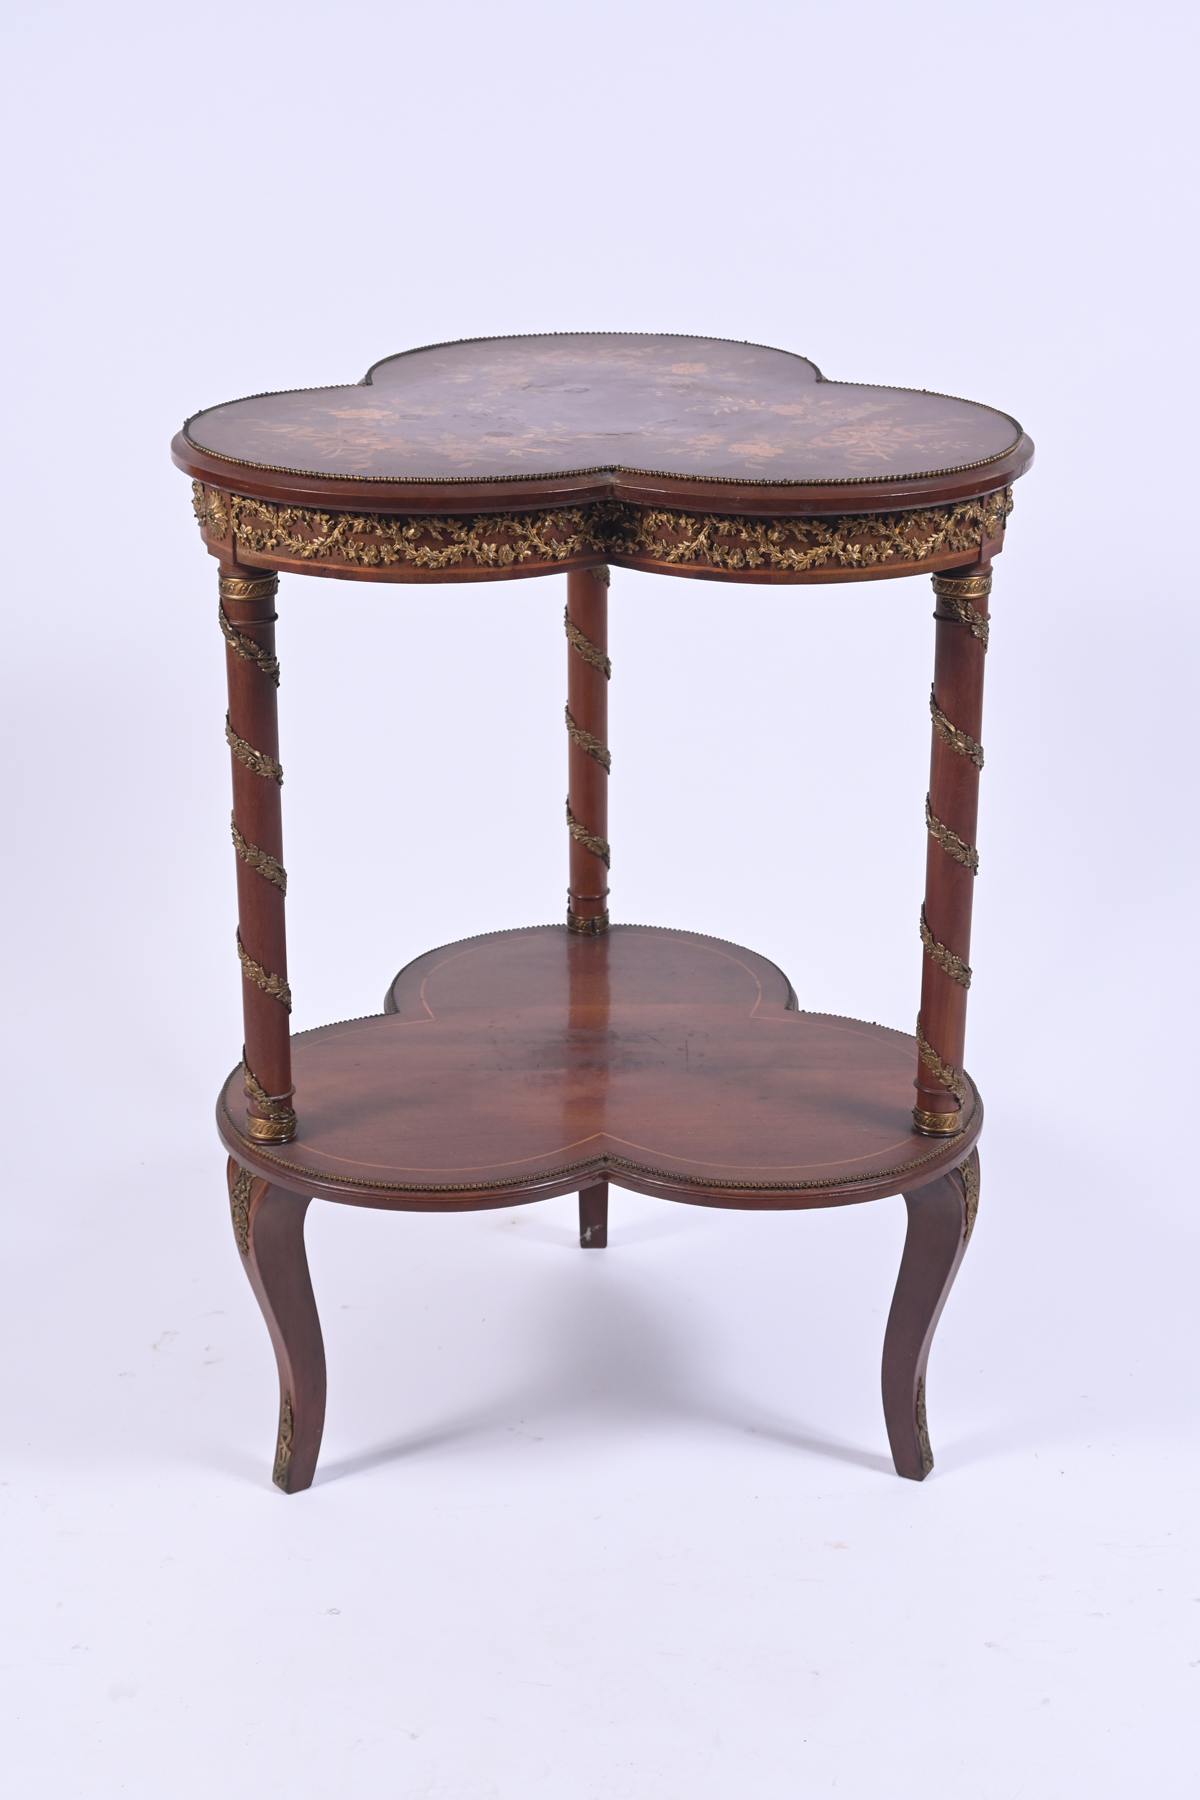 TRI-LOBED INLAID MARQUETRY TABLE: